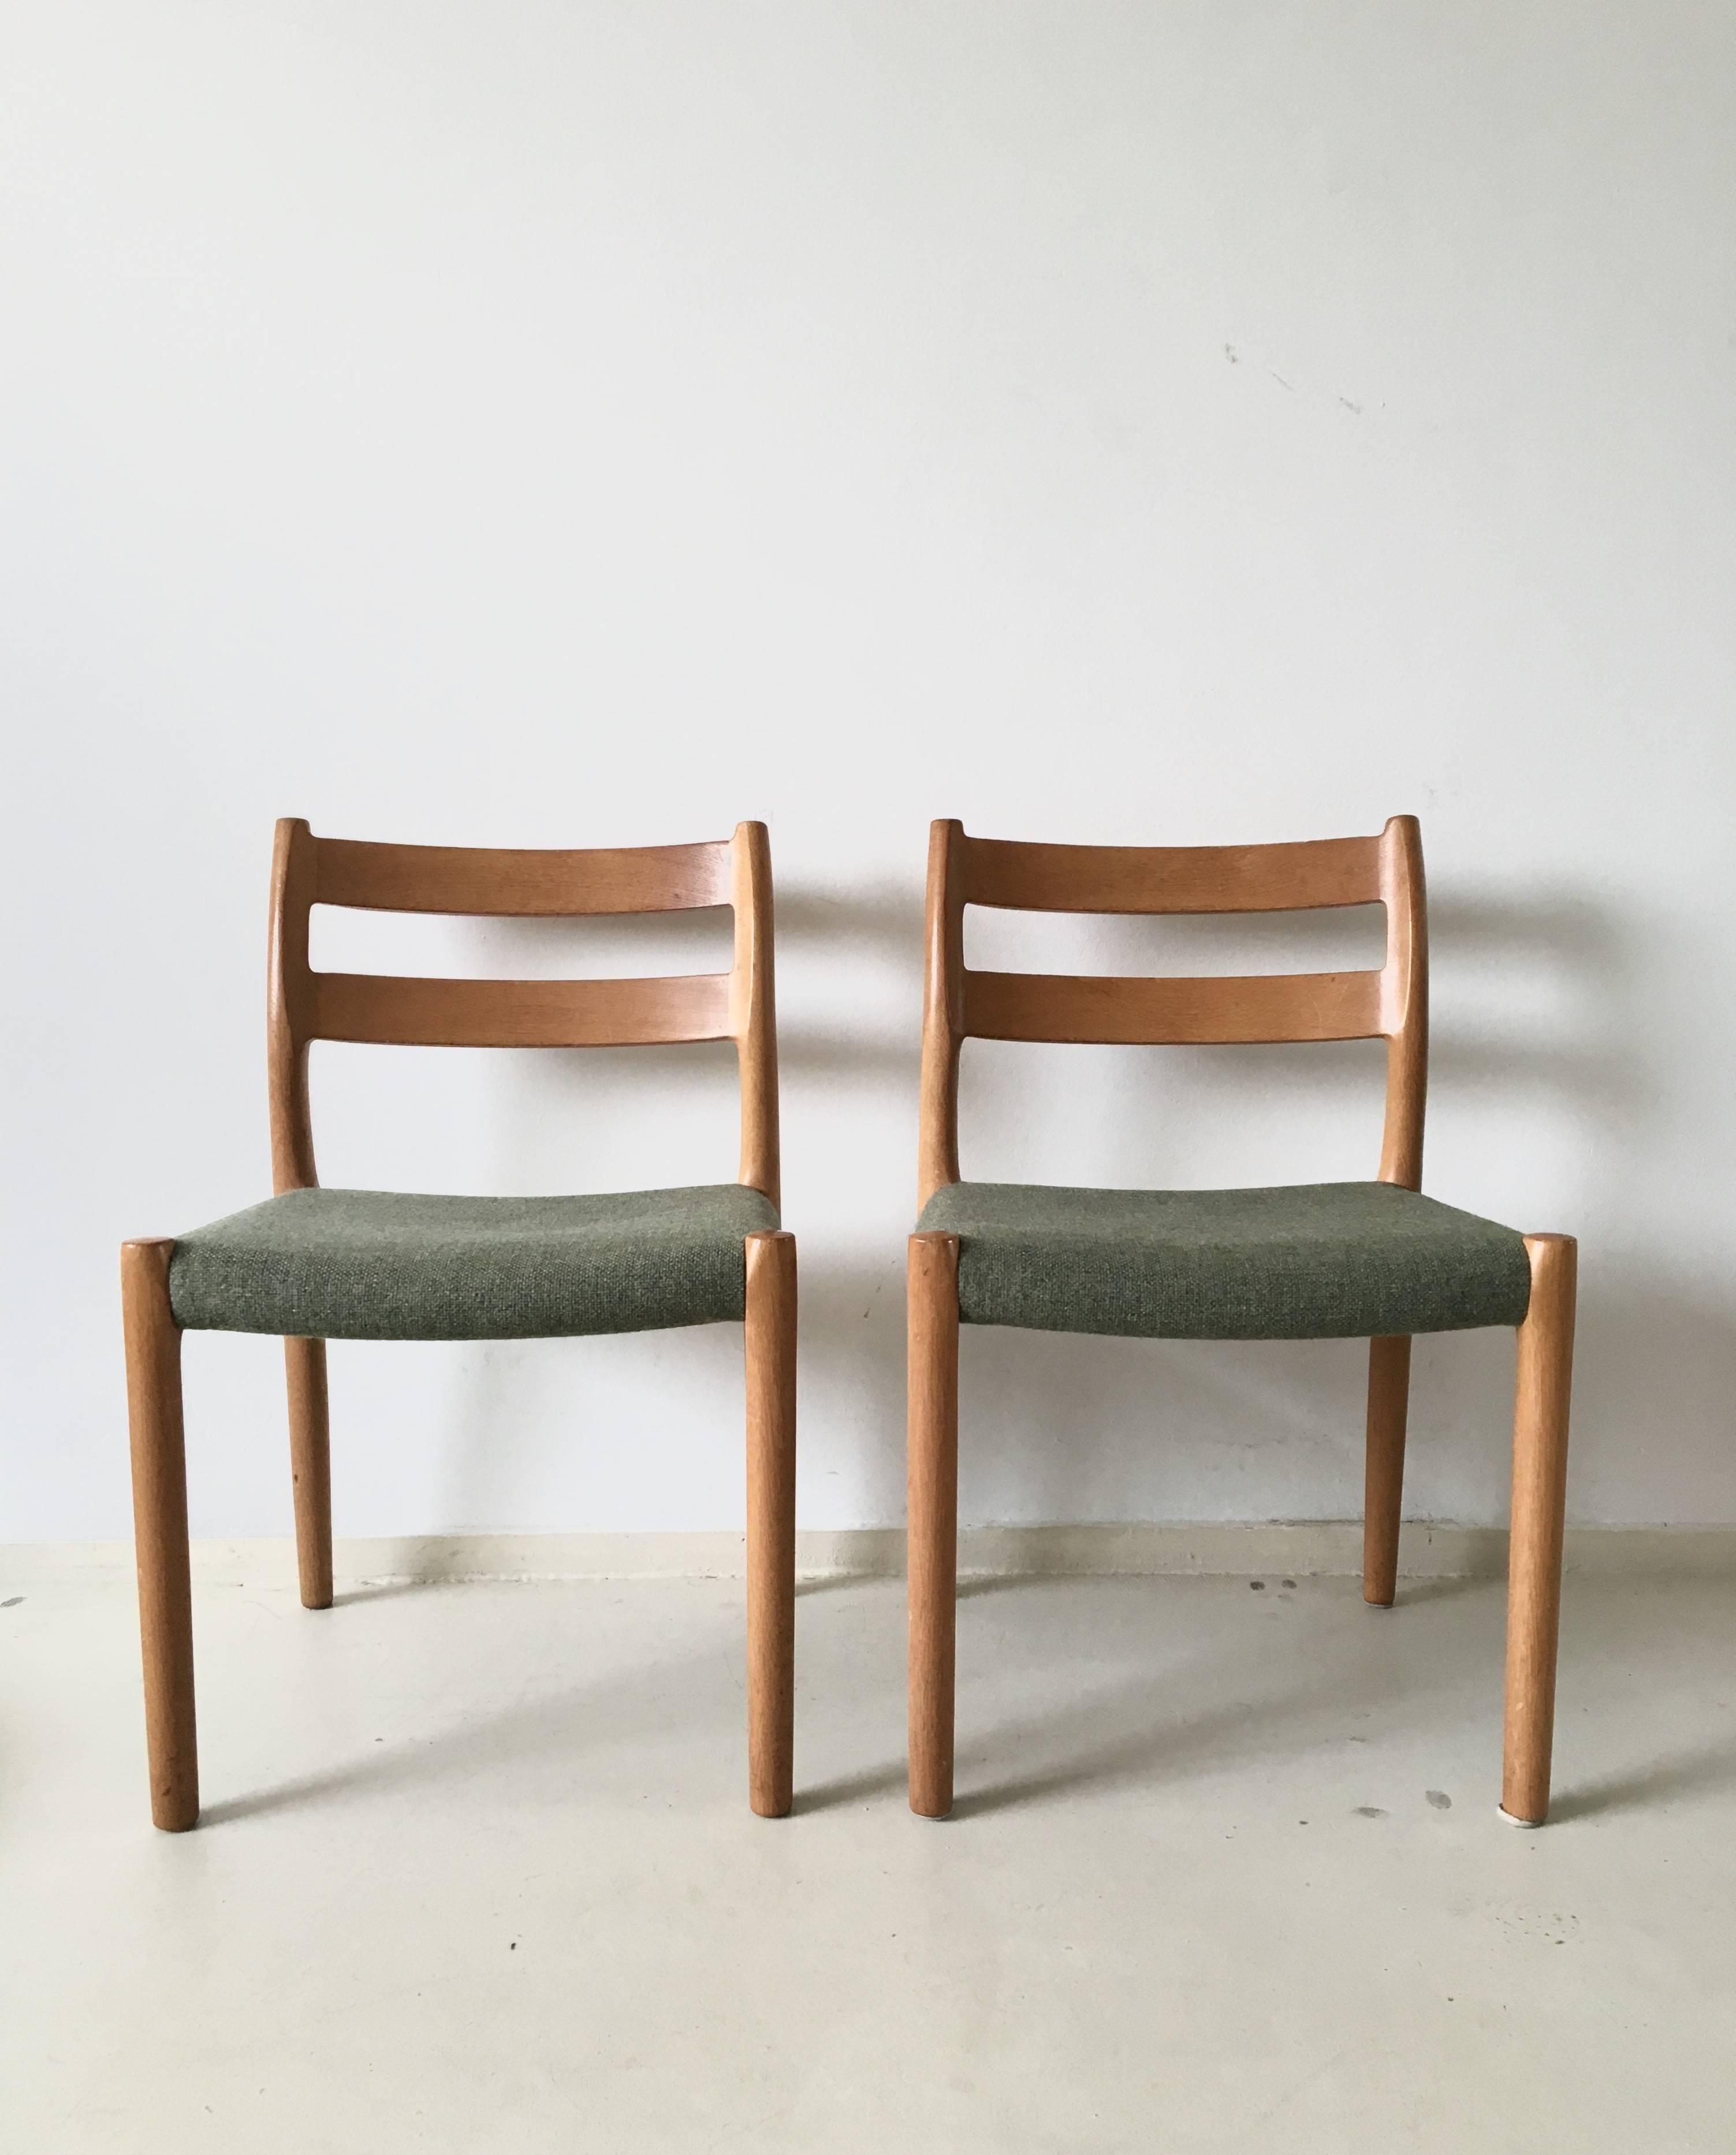 Set of two dining chairs designed by J.L. Moller and manufactured by Højbjerg Denmark, circa 1960s. The chairs have elegant curved frames in massive teak, and upholstery in green colored wool.

They remain in excellent condition.